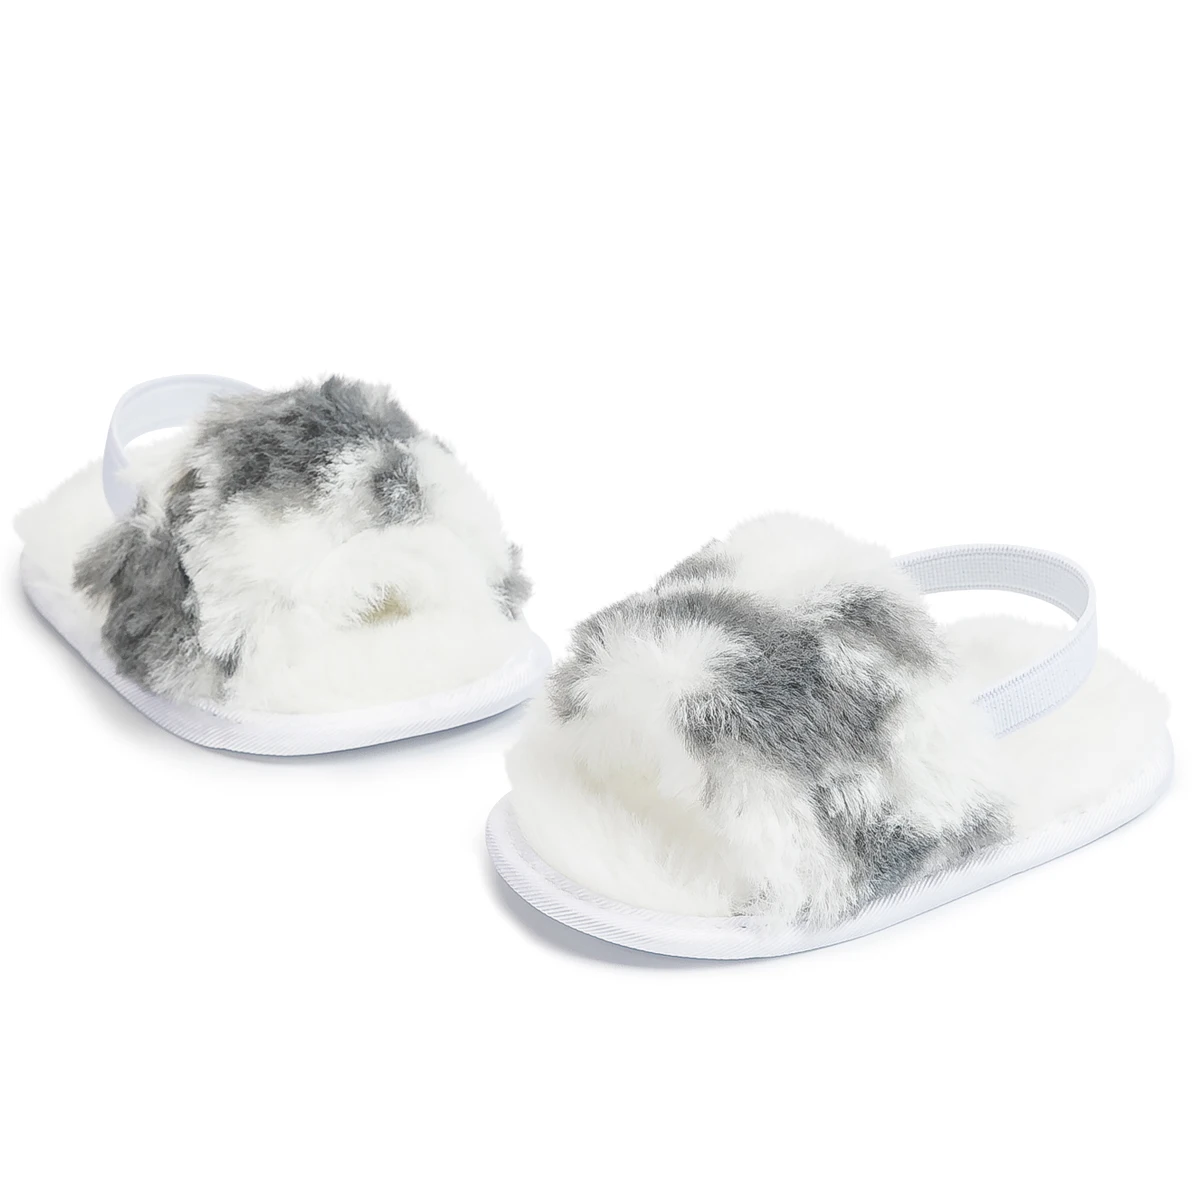 Summer New Products Toddler crib shoes Soft and supple fur Stretchy rear strap girl and boy baby sandals for girls